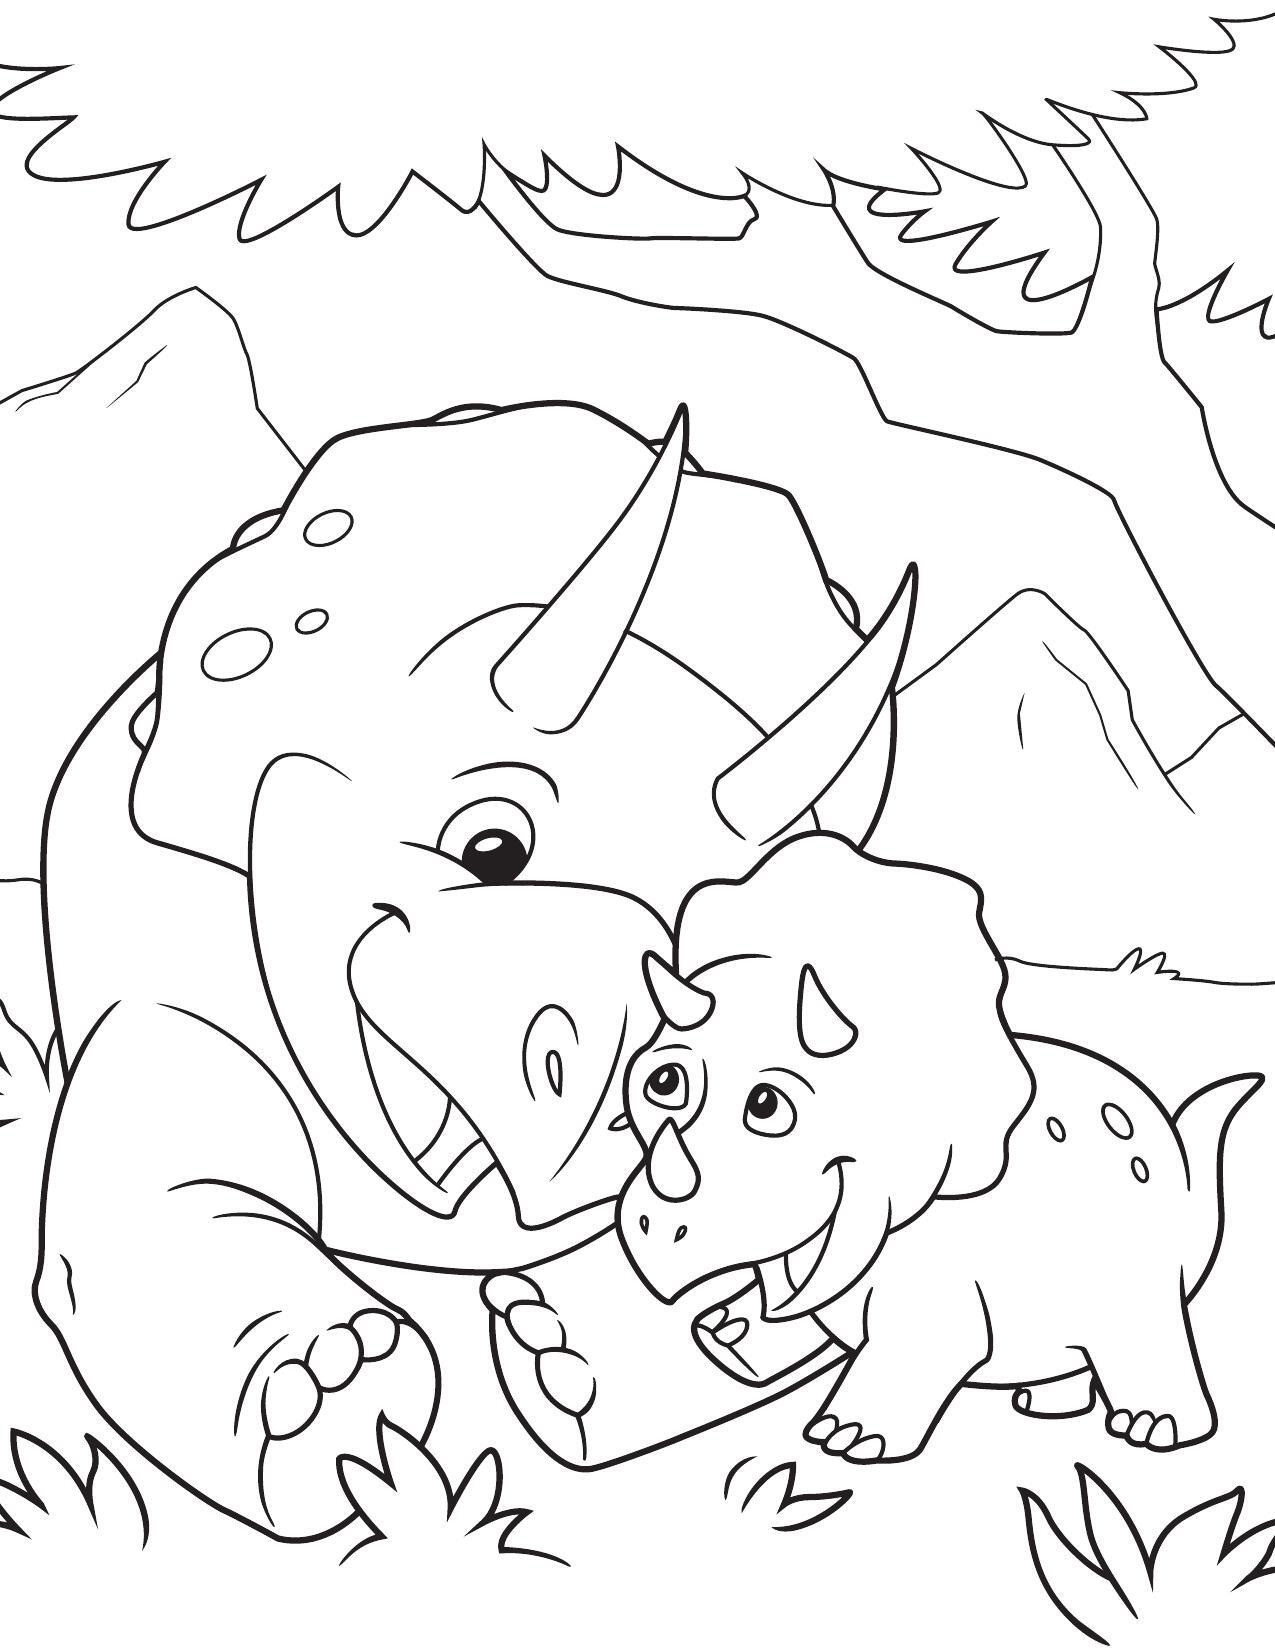 Triceratops Sketch